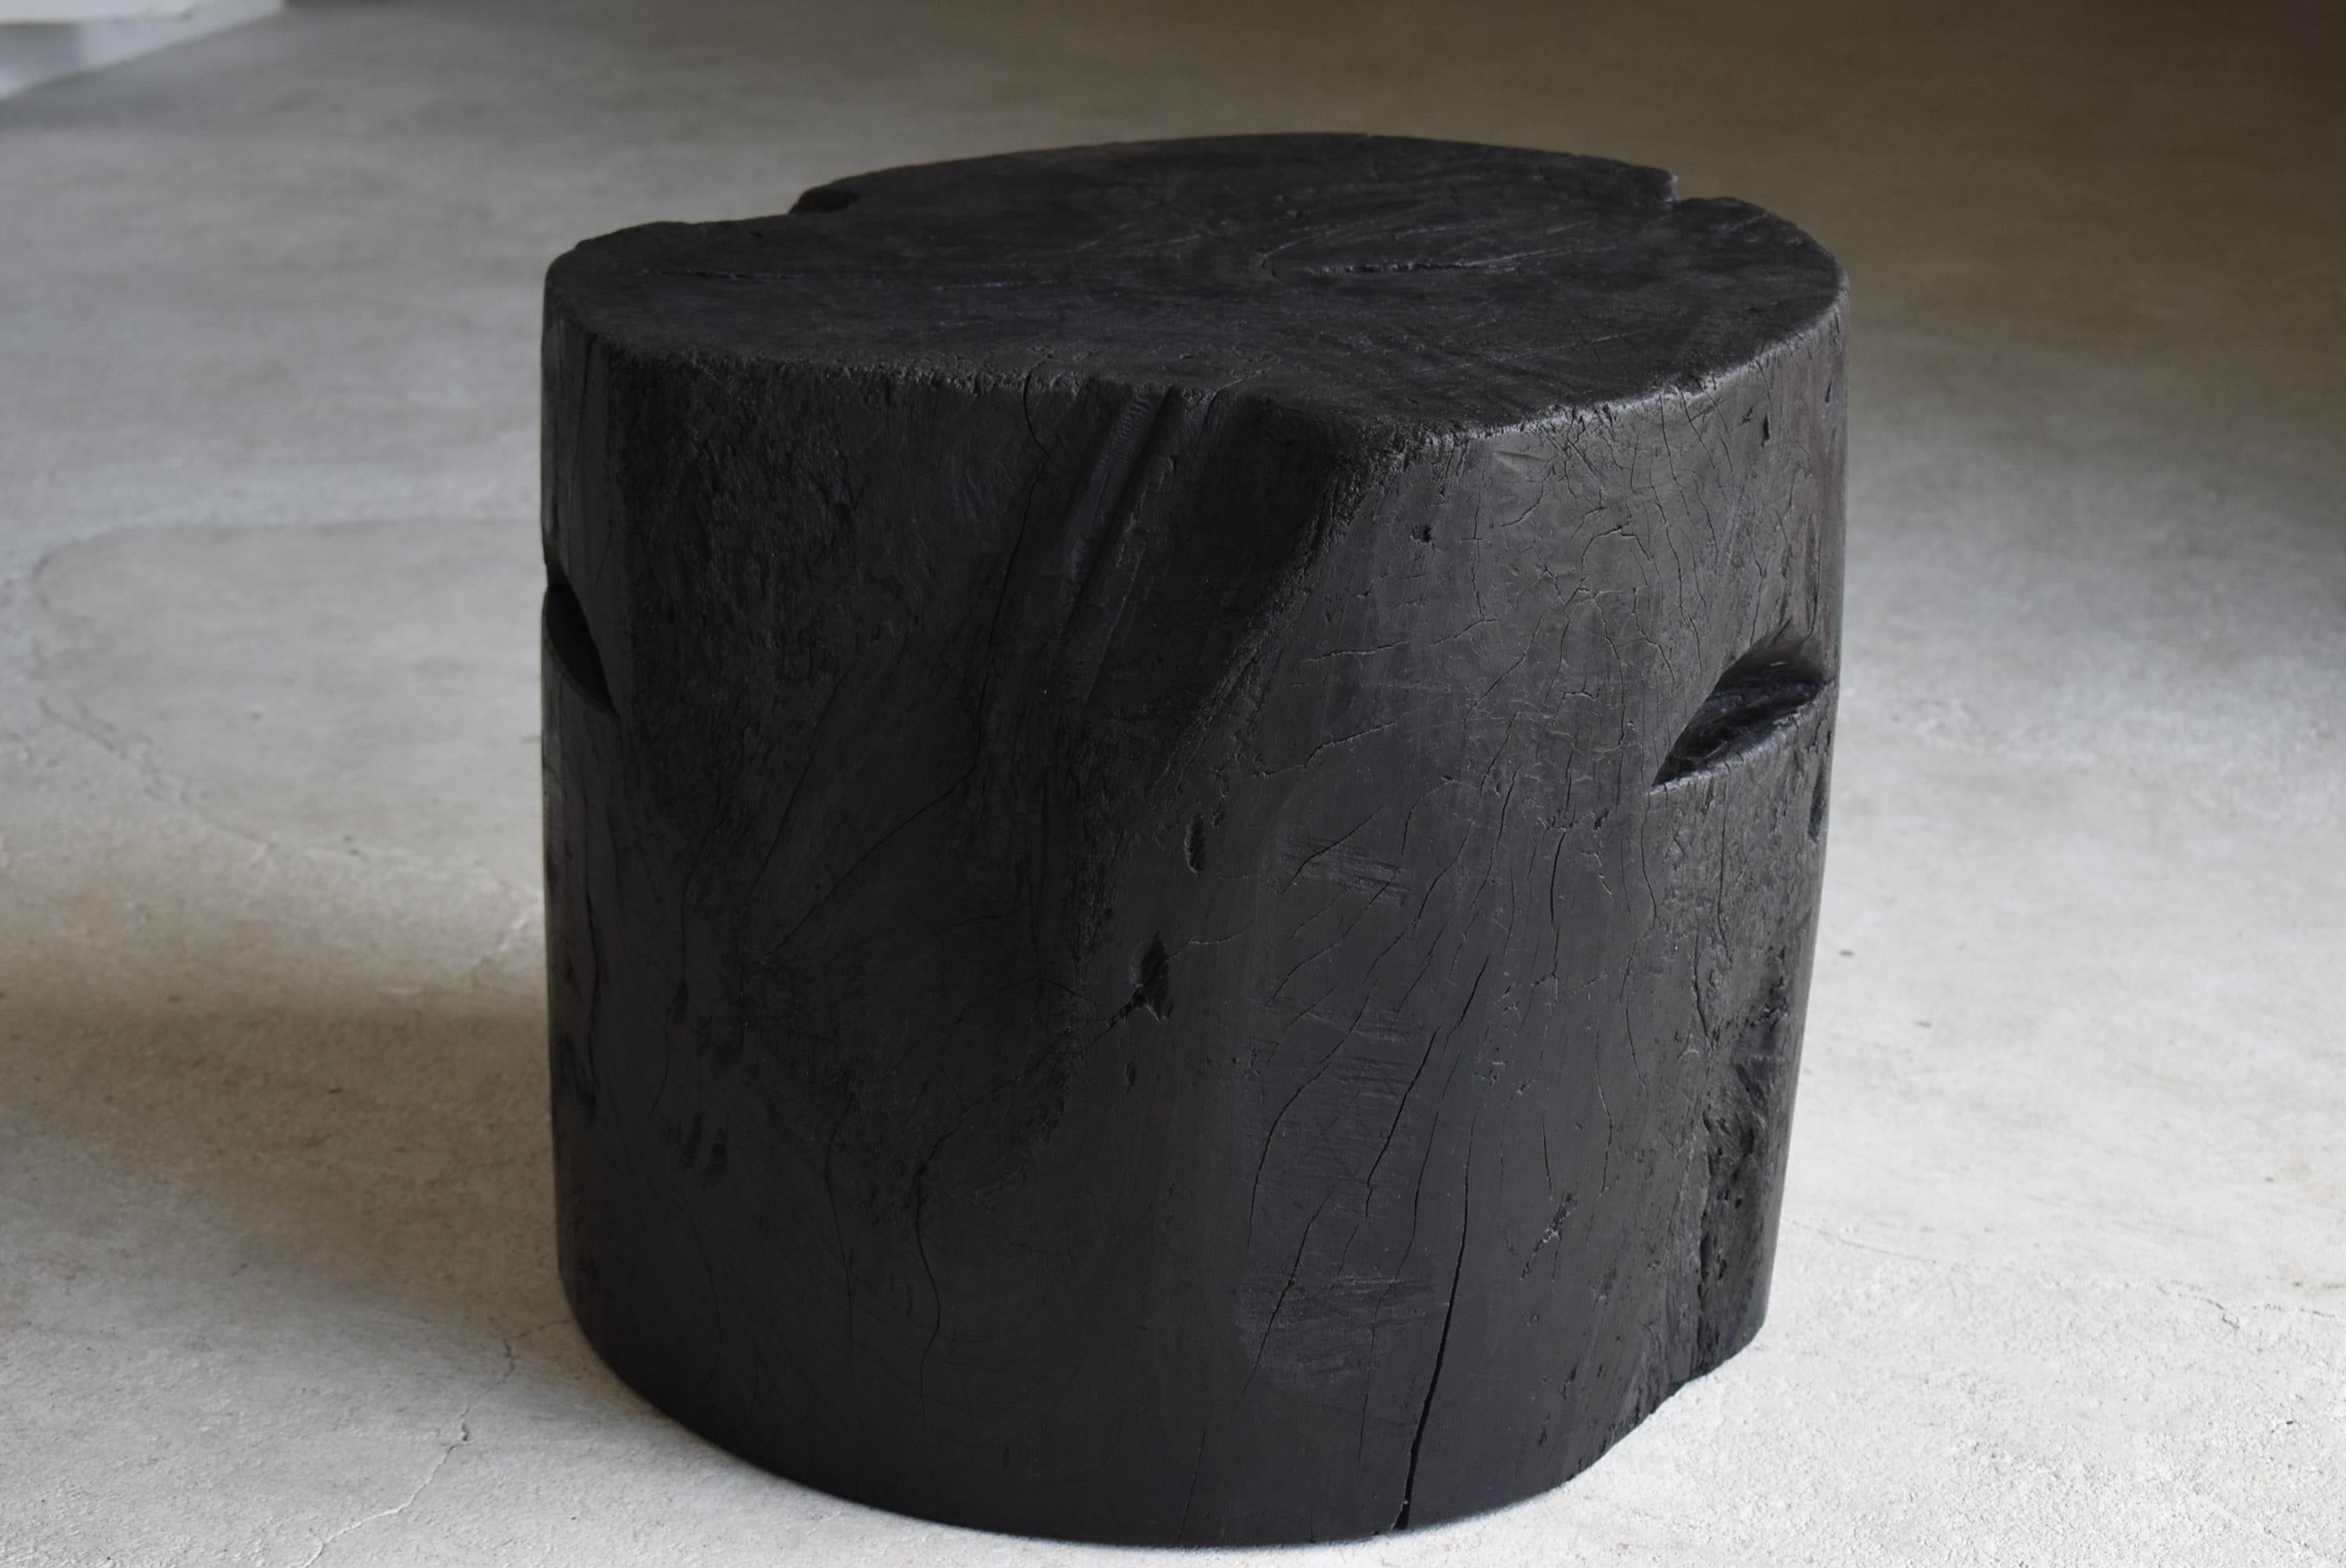 20th Century Japanese Primitive Black Coffee Table Wooden Block/Antique Side Table Wabisabi